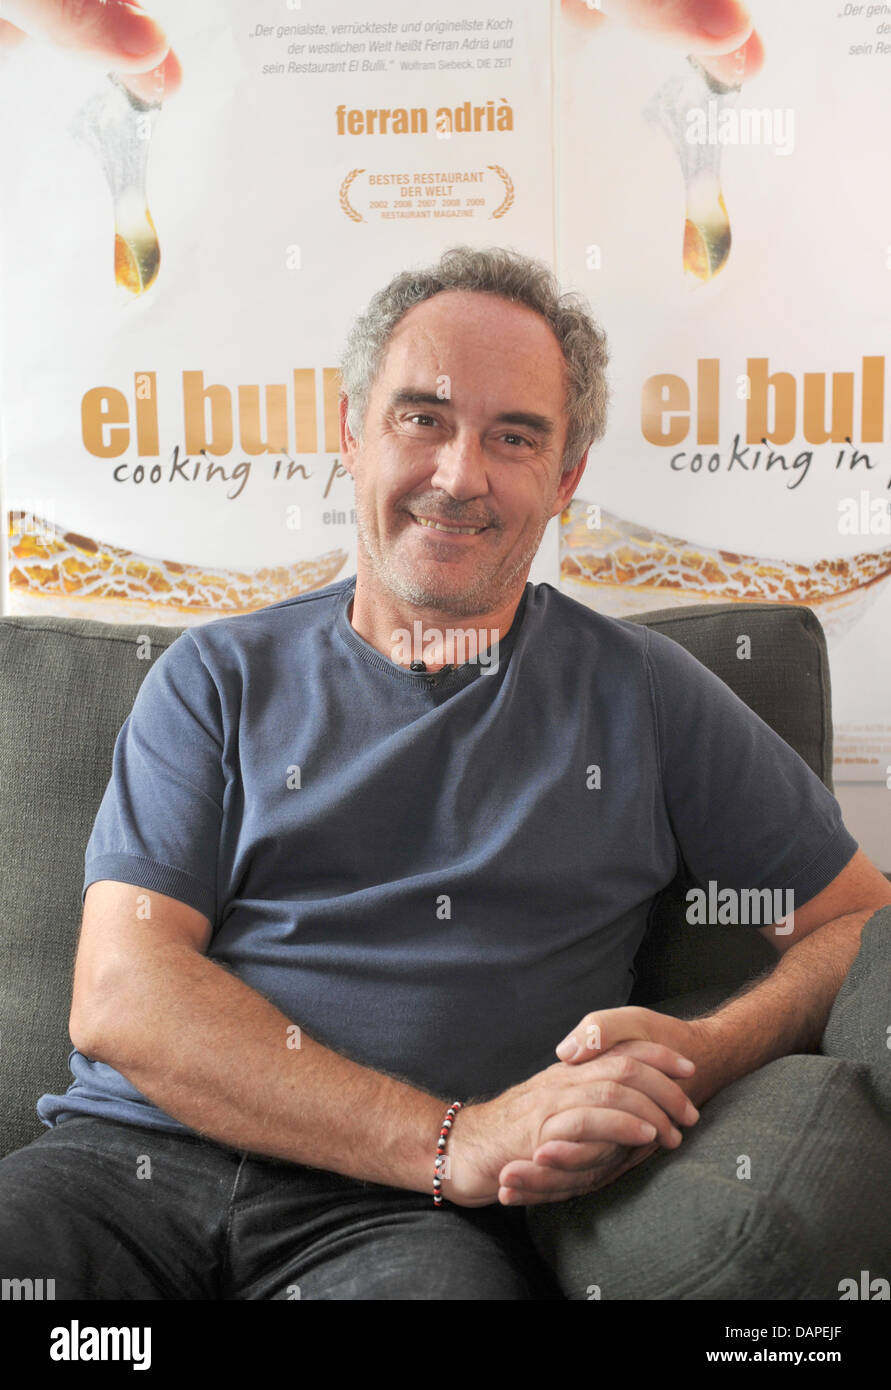 Spanish 3-star chef Ferran Adria poses in Hotel Gat Point Charlie in Berlin, Germany, 15 August 2011. Adria was the chef at El Bulli restaurant in Roses on the Costa Brava, which closed on 30 July 2011. For the documentary film, 'El Bulli - Cooking in Progress', the chef was accompanied at work in his molecular gastronomy restaurant for a year and the film premieres Monday evening  Stock Photo